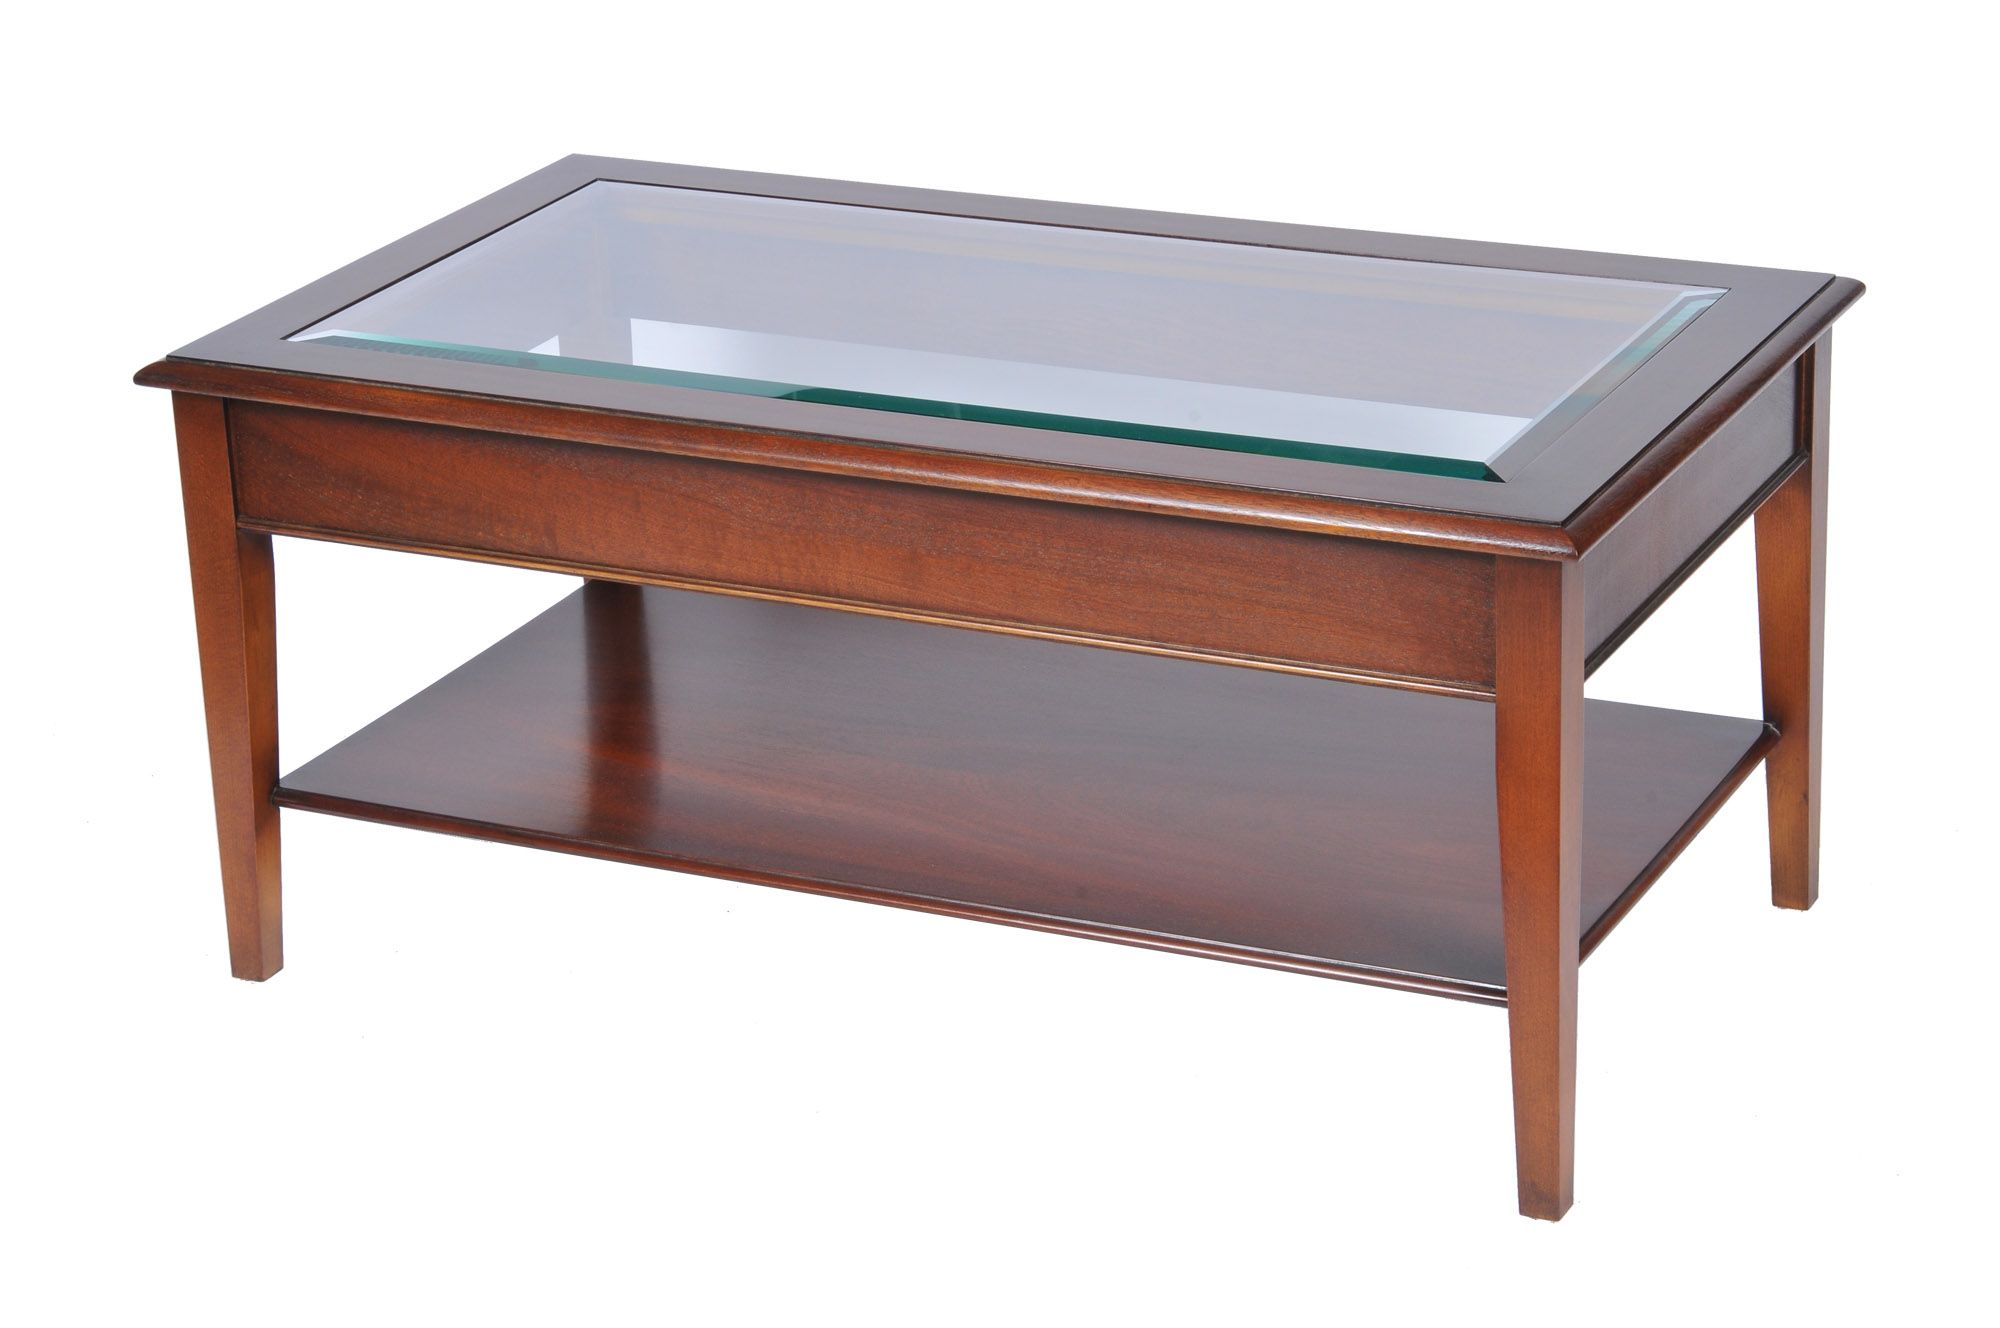 Widely Used Smooth Top Coffee Tables Intended For Bradley Mahogany 875 Glass Top Coffee Table – Tr Hayes Furniture Bath (View 10 of 20)